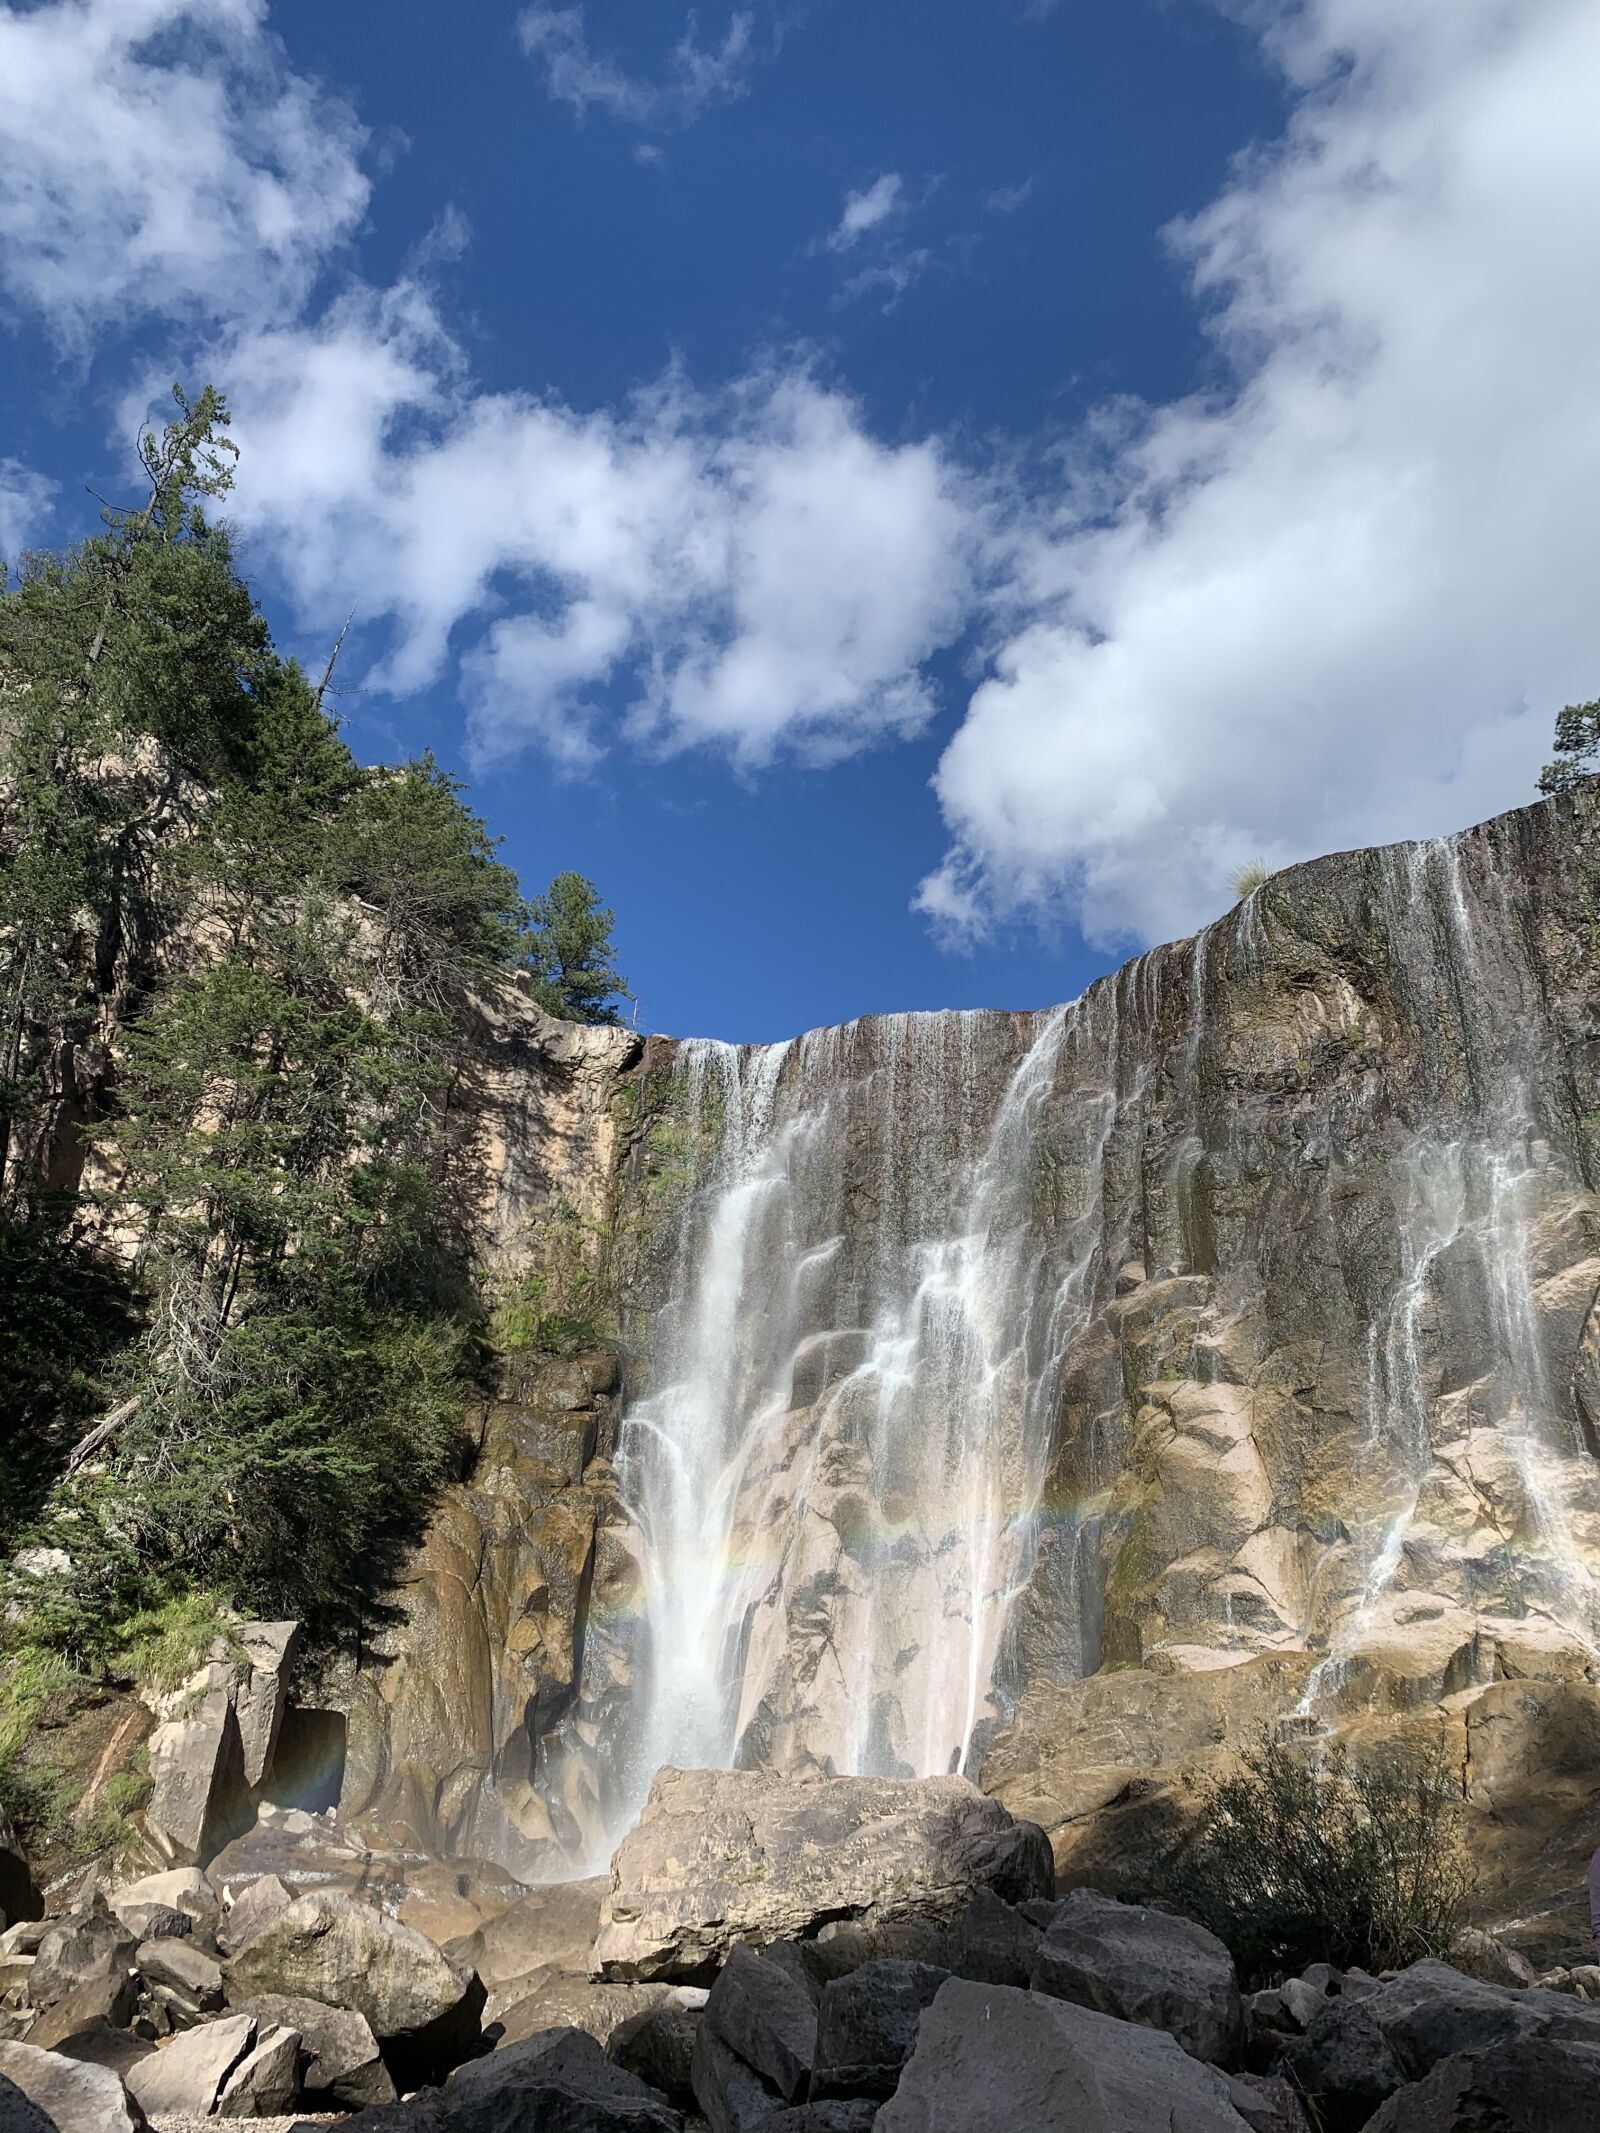 Apple iPhone XR sample photo. Waterfall, sky, nature photography